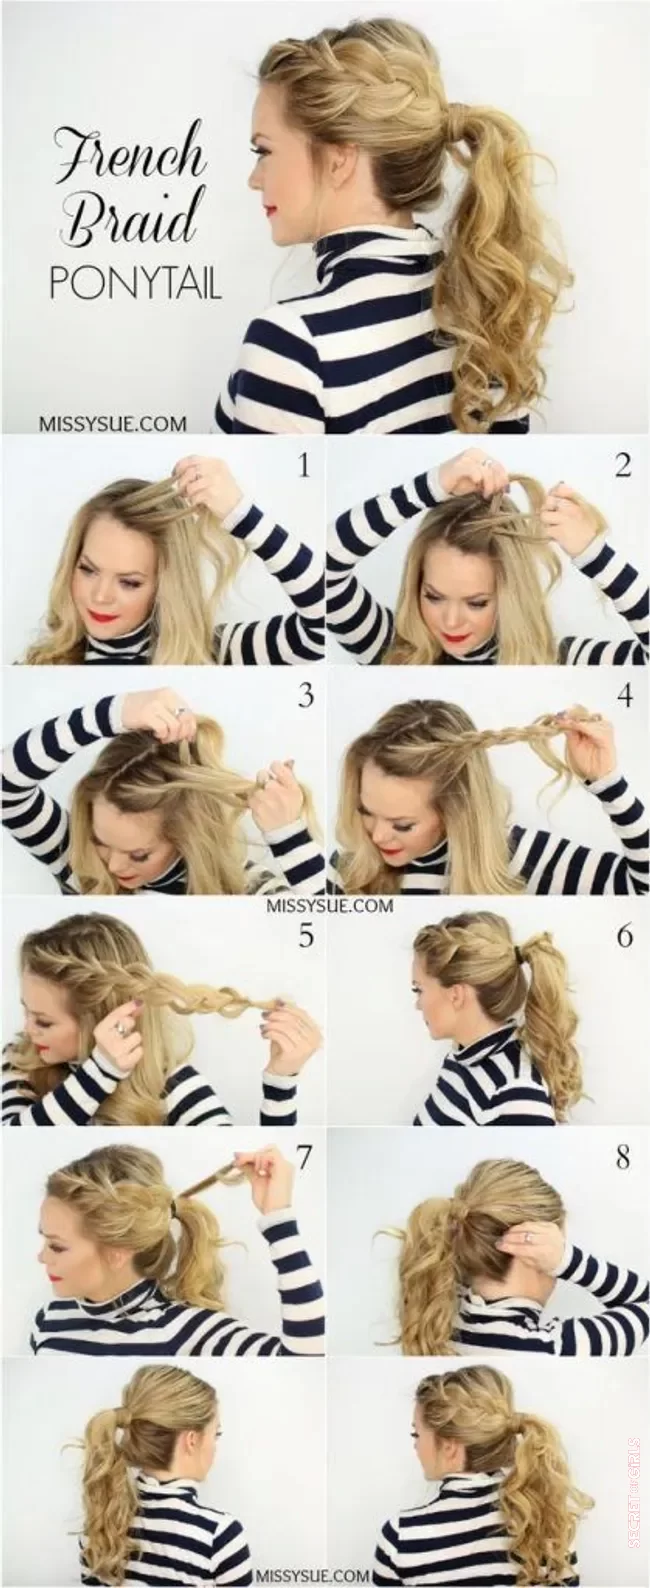 Braided ponytail | 8 Braid Hairstyles Ideas And Our Tips For Success